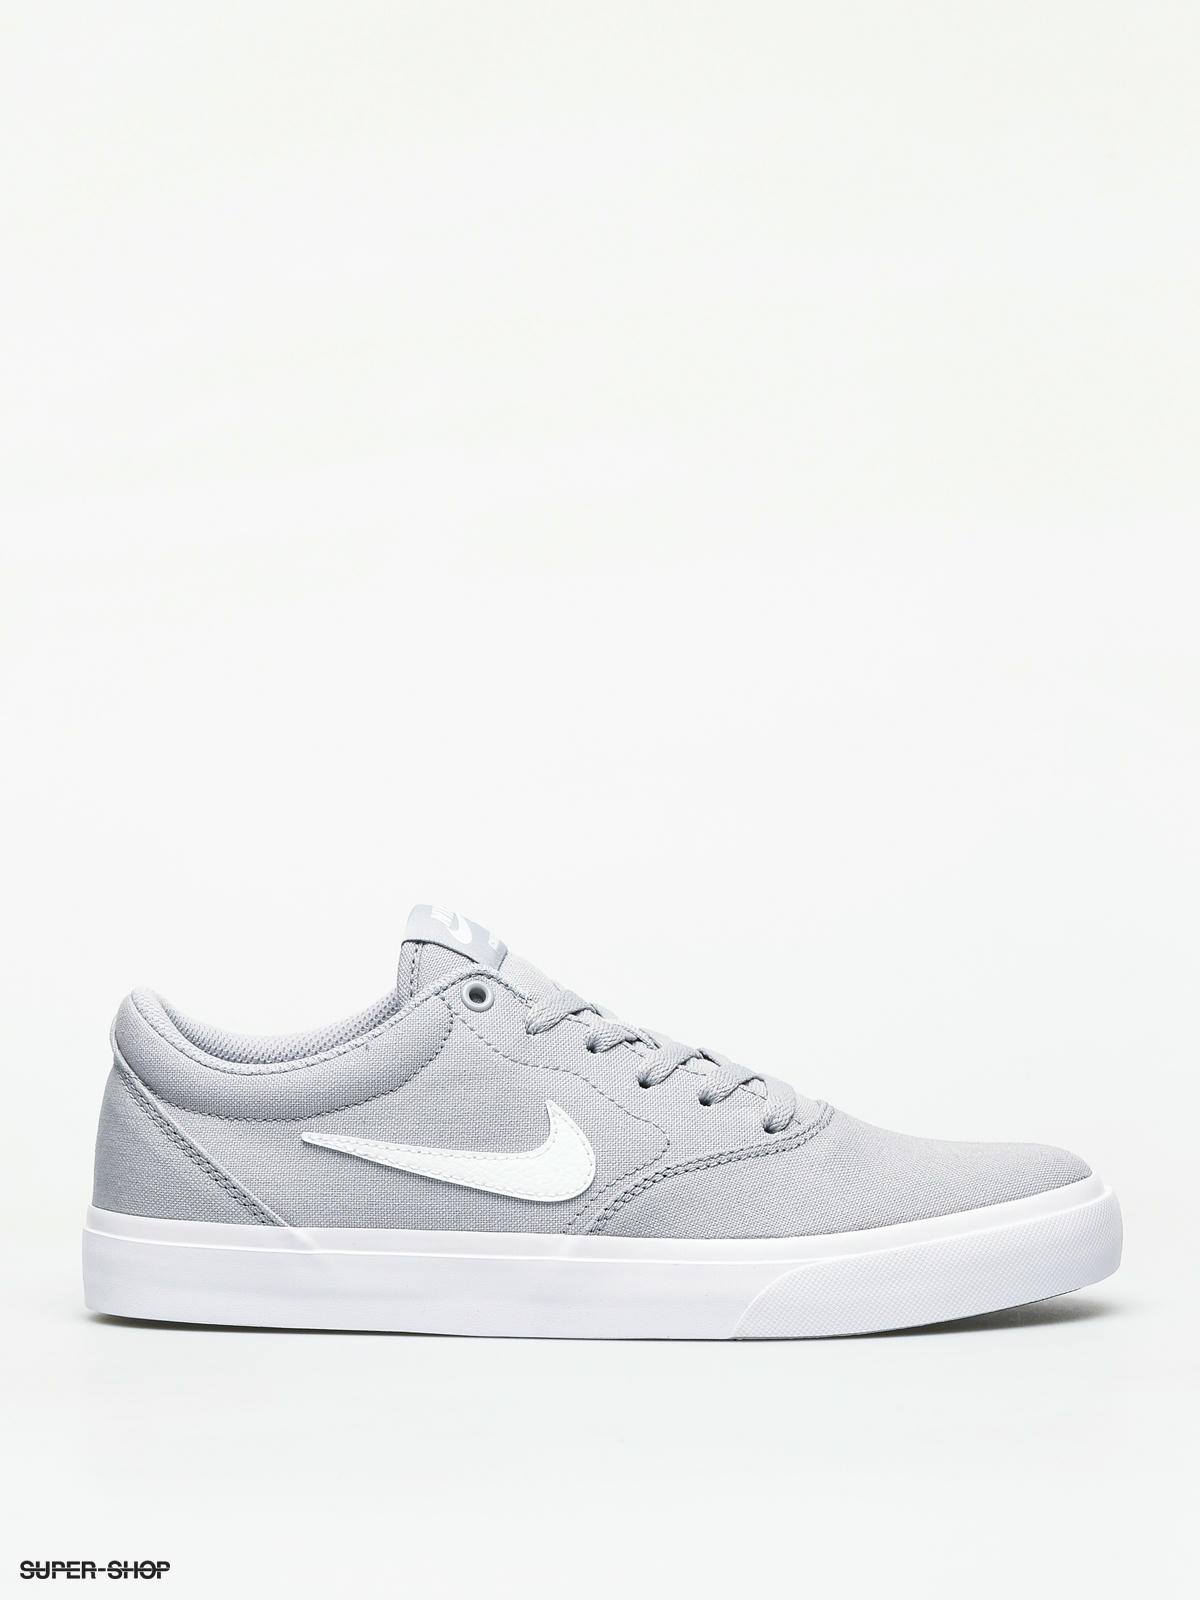 tsunami Brein in stand houden Nike SB Charge Slr Shoes (wolf grey/white)